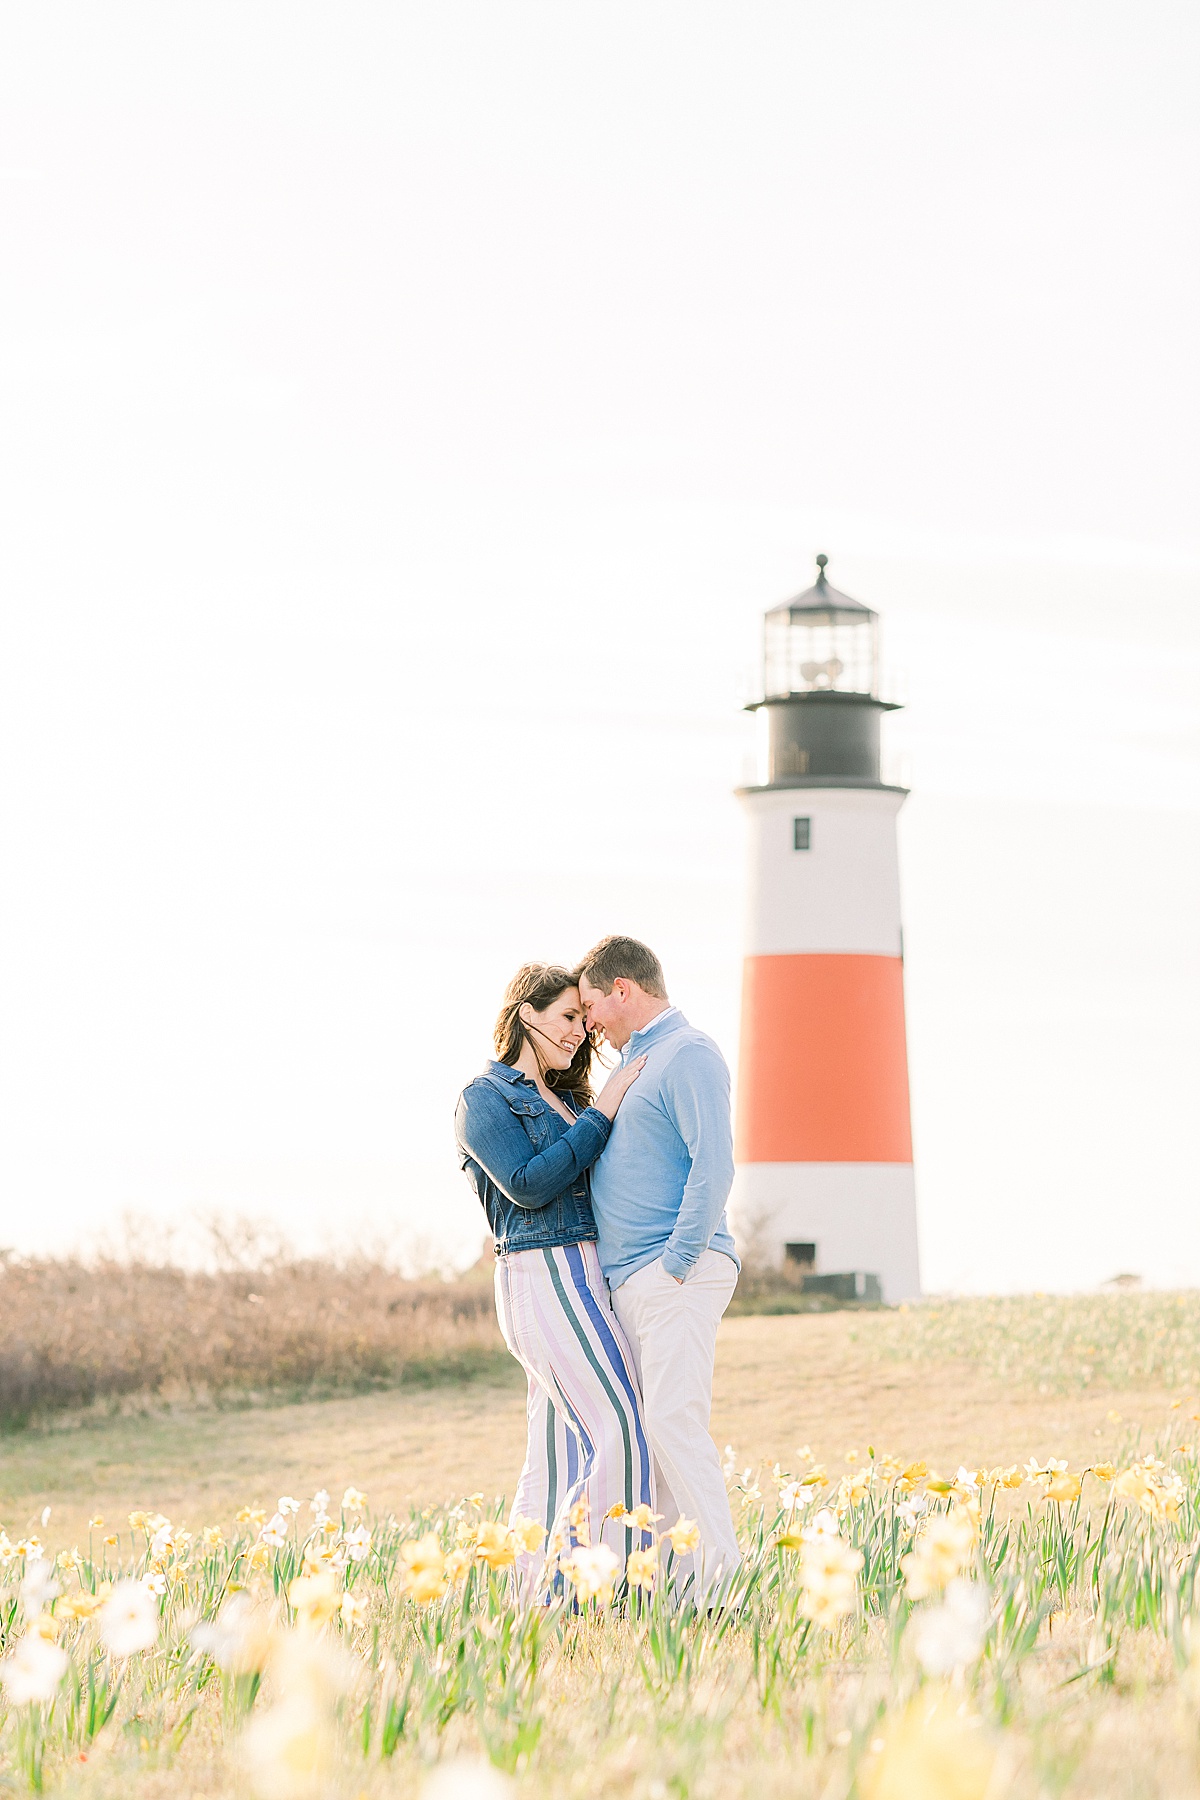 A spring Engagement Session at Sankaty Lighthouse by Rebecca Love Photography